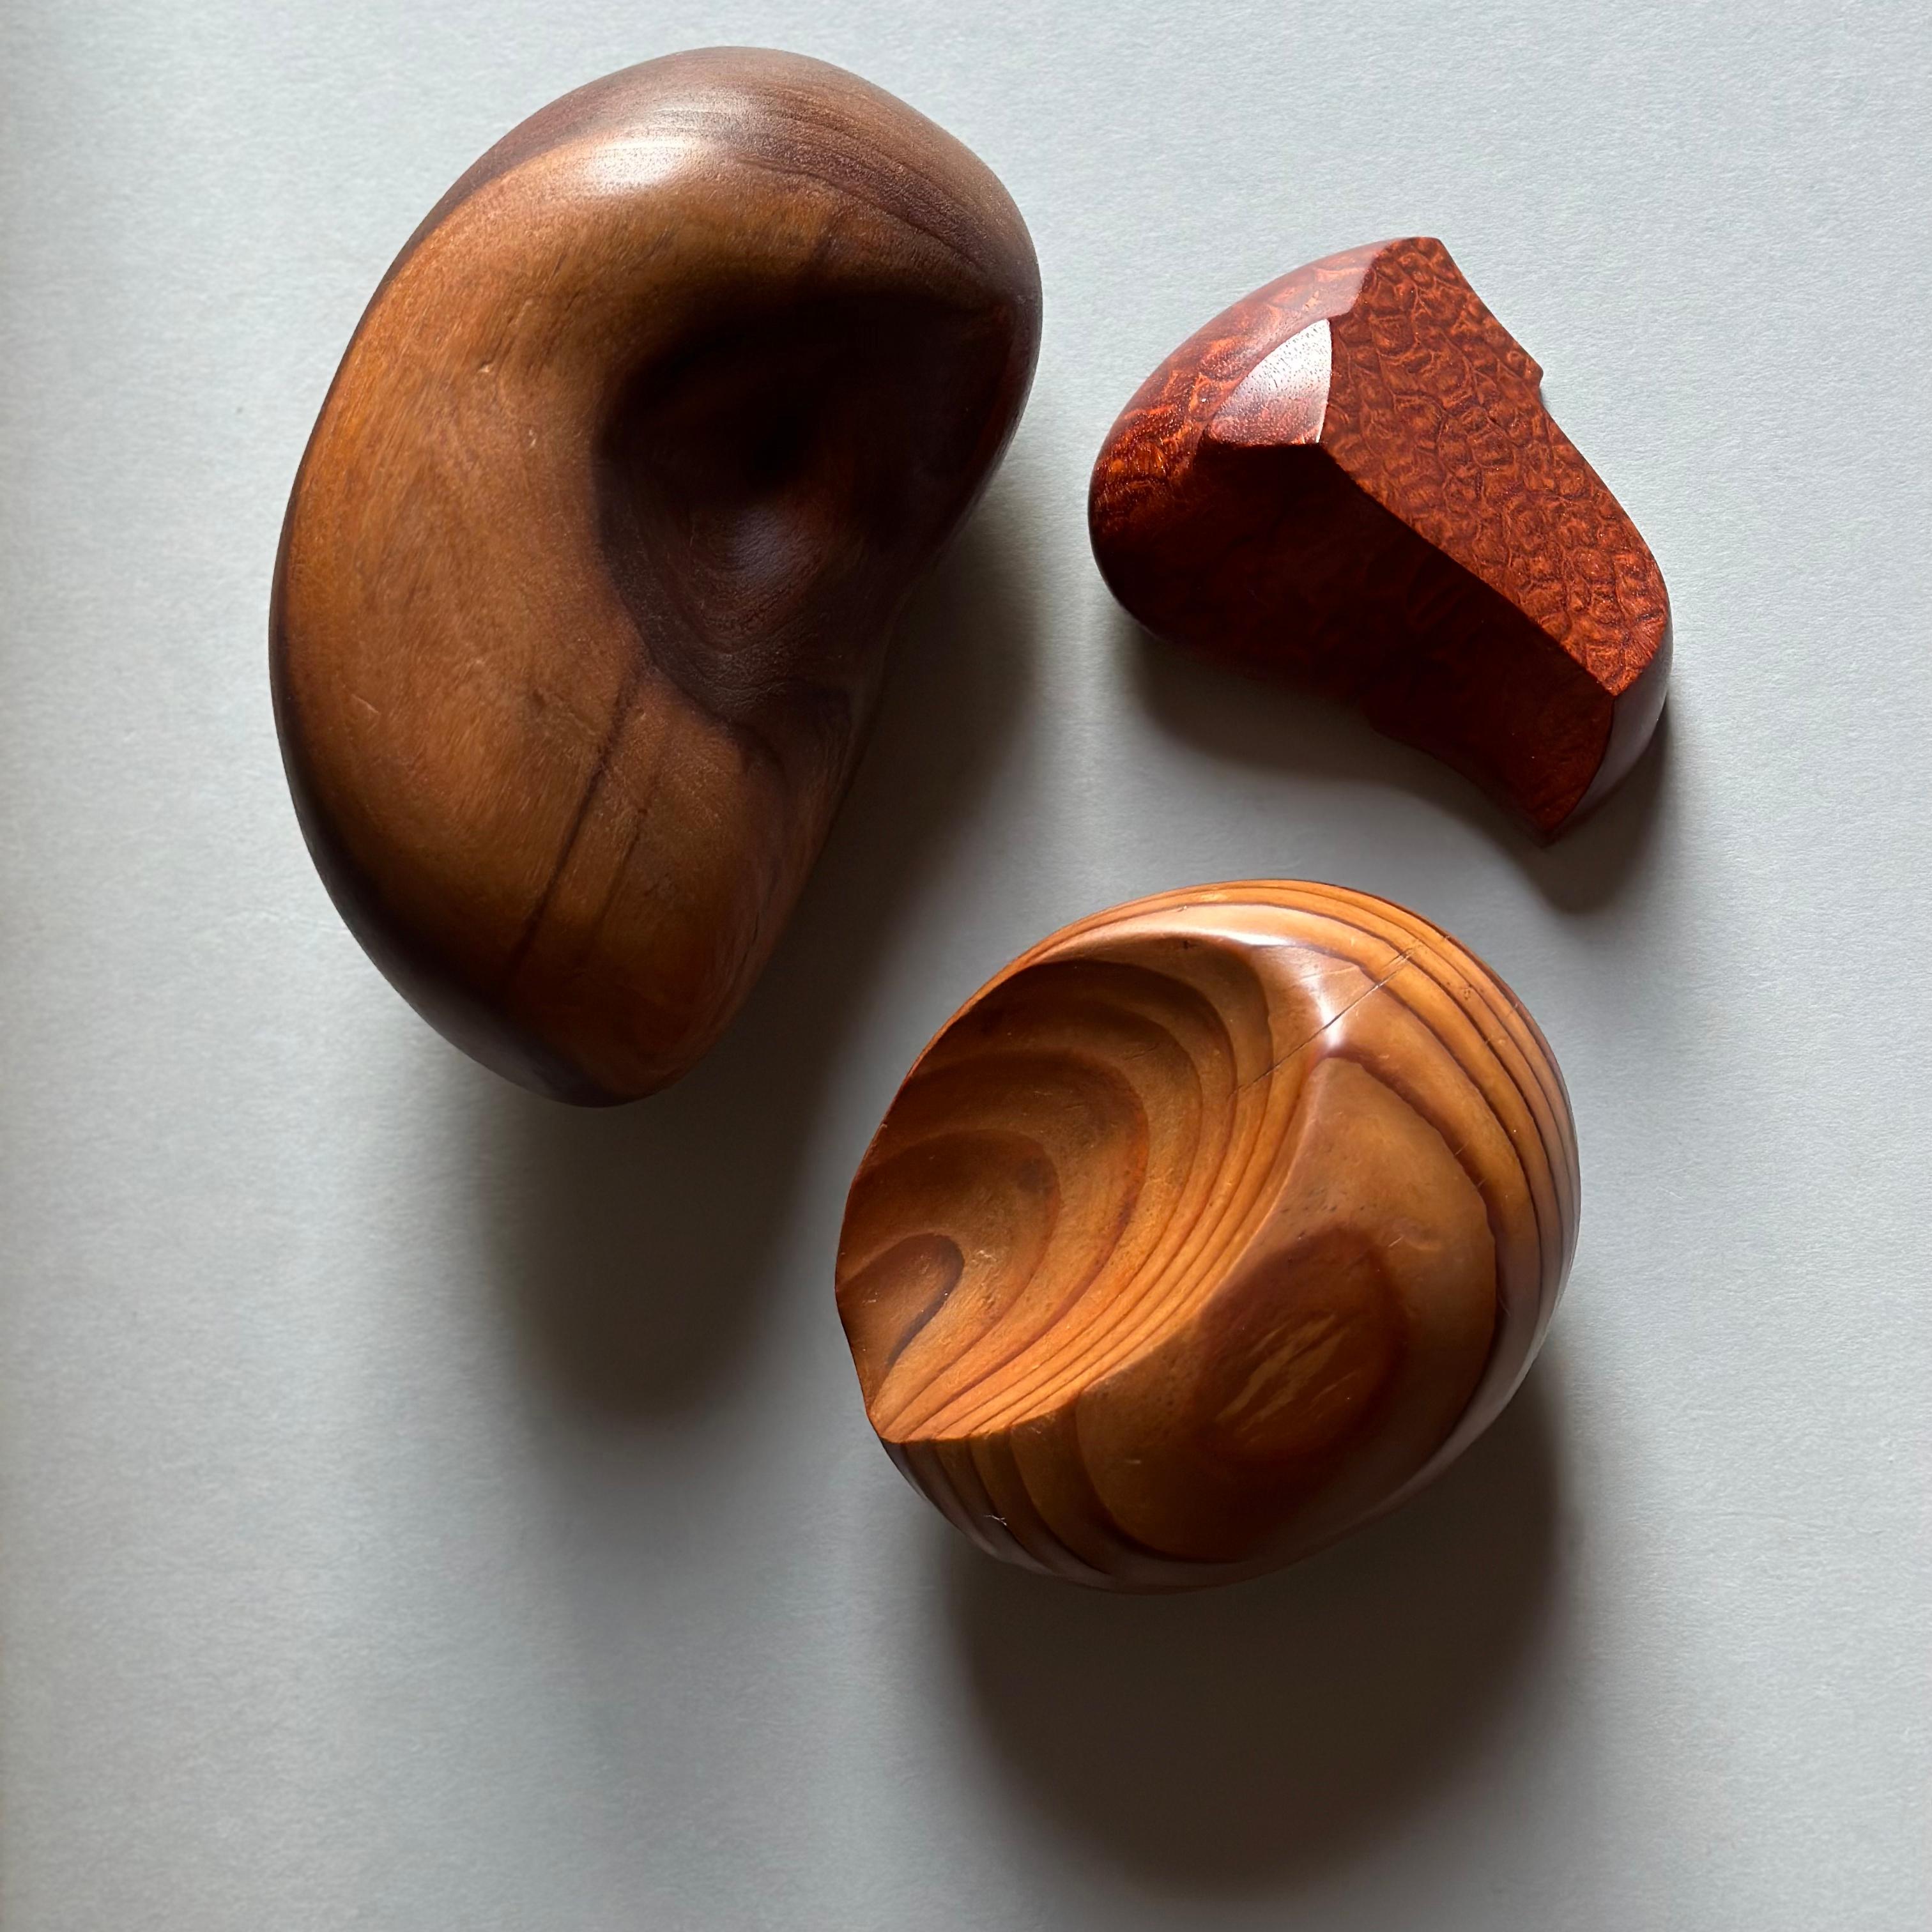 Three form study sculptures in American walnut and pine, both anonymous, mid 20th century, and Laotian afzelia xylay by master woodworker, Norm Sartorius, early 21st century.

walnut: 3.75 h x 7 w x 4 d
pine: 3 h x 5 w x 4.5 d
afzelia: 2.5 h x 4.25